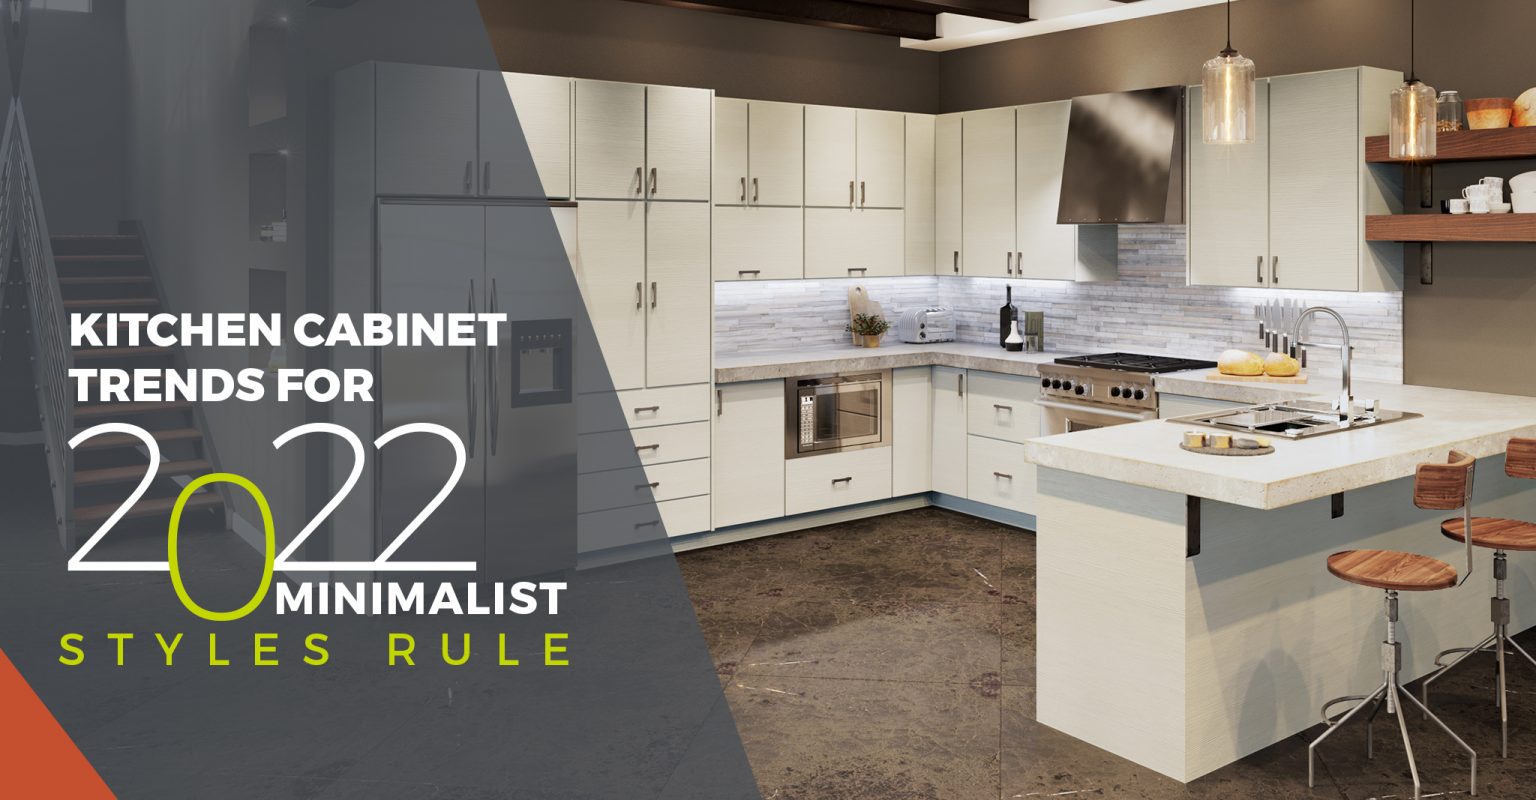 Kitchen Cabinet Trends for 2022 - Minimalist Styles Rule | CabinetCorp